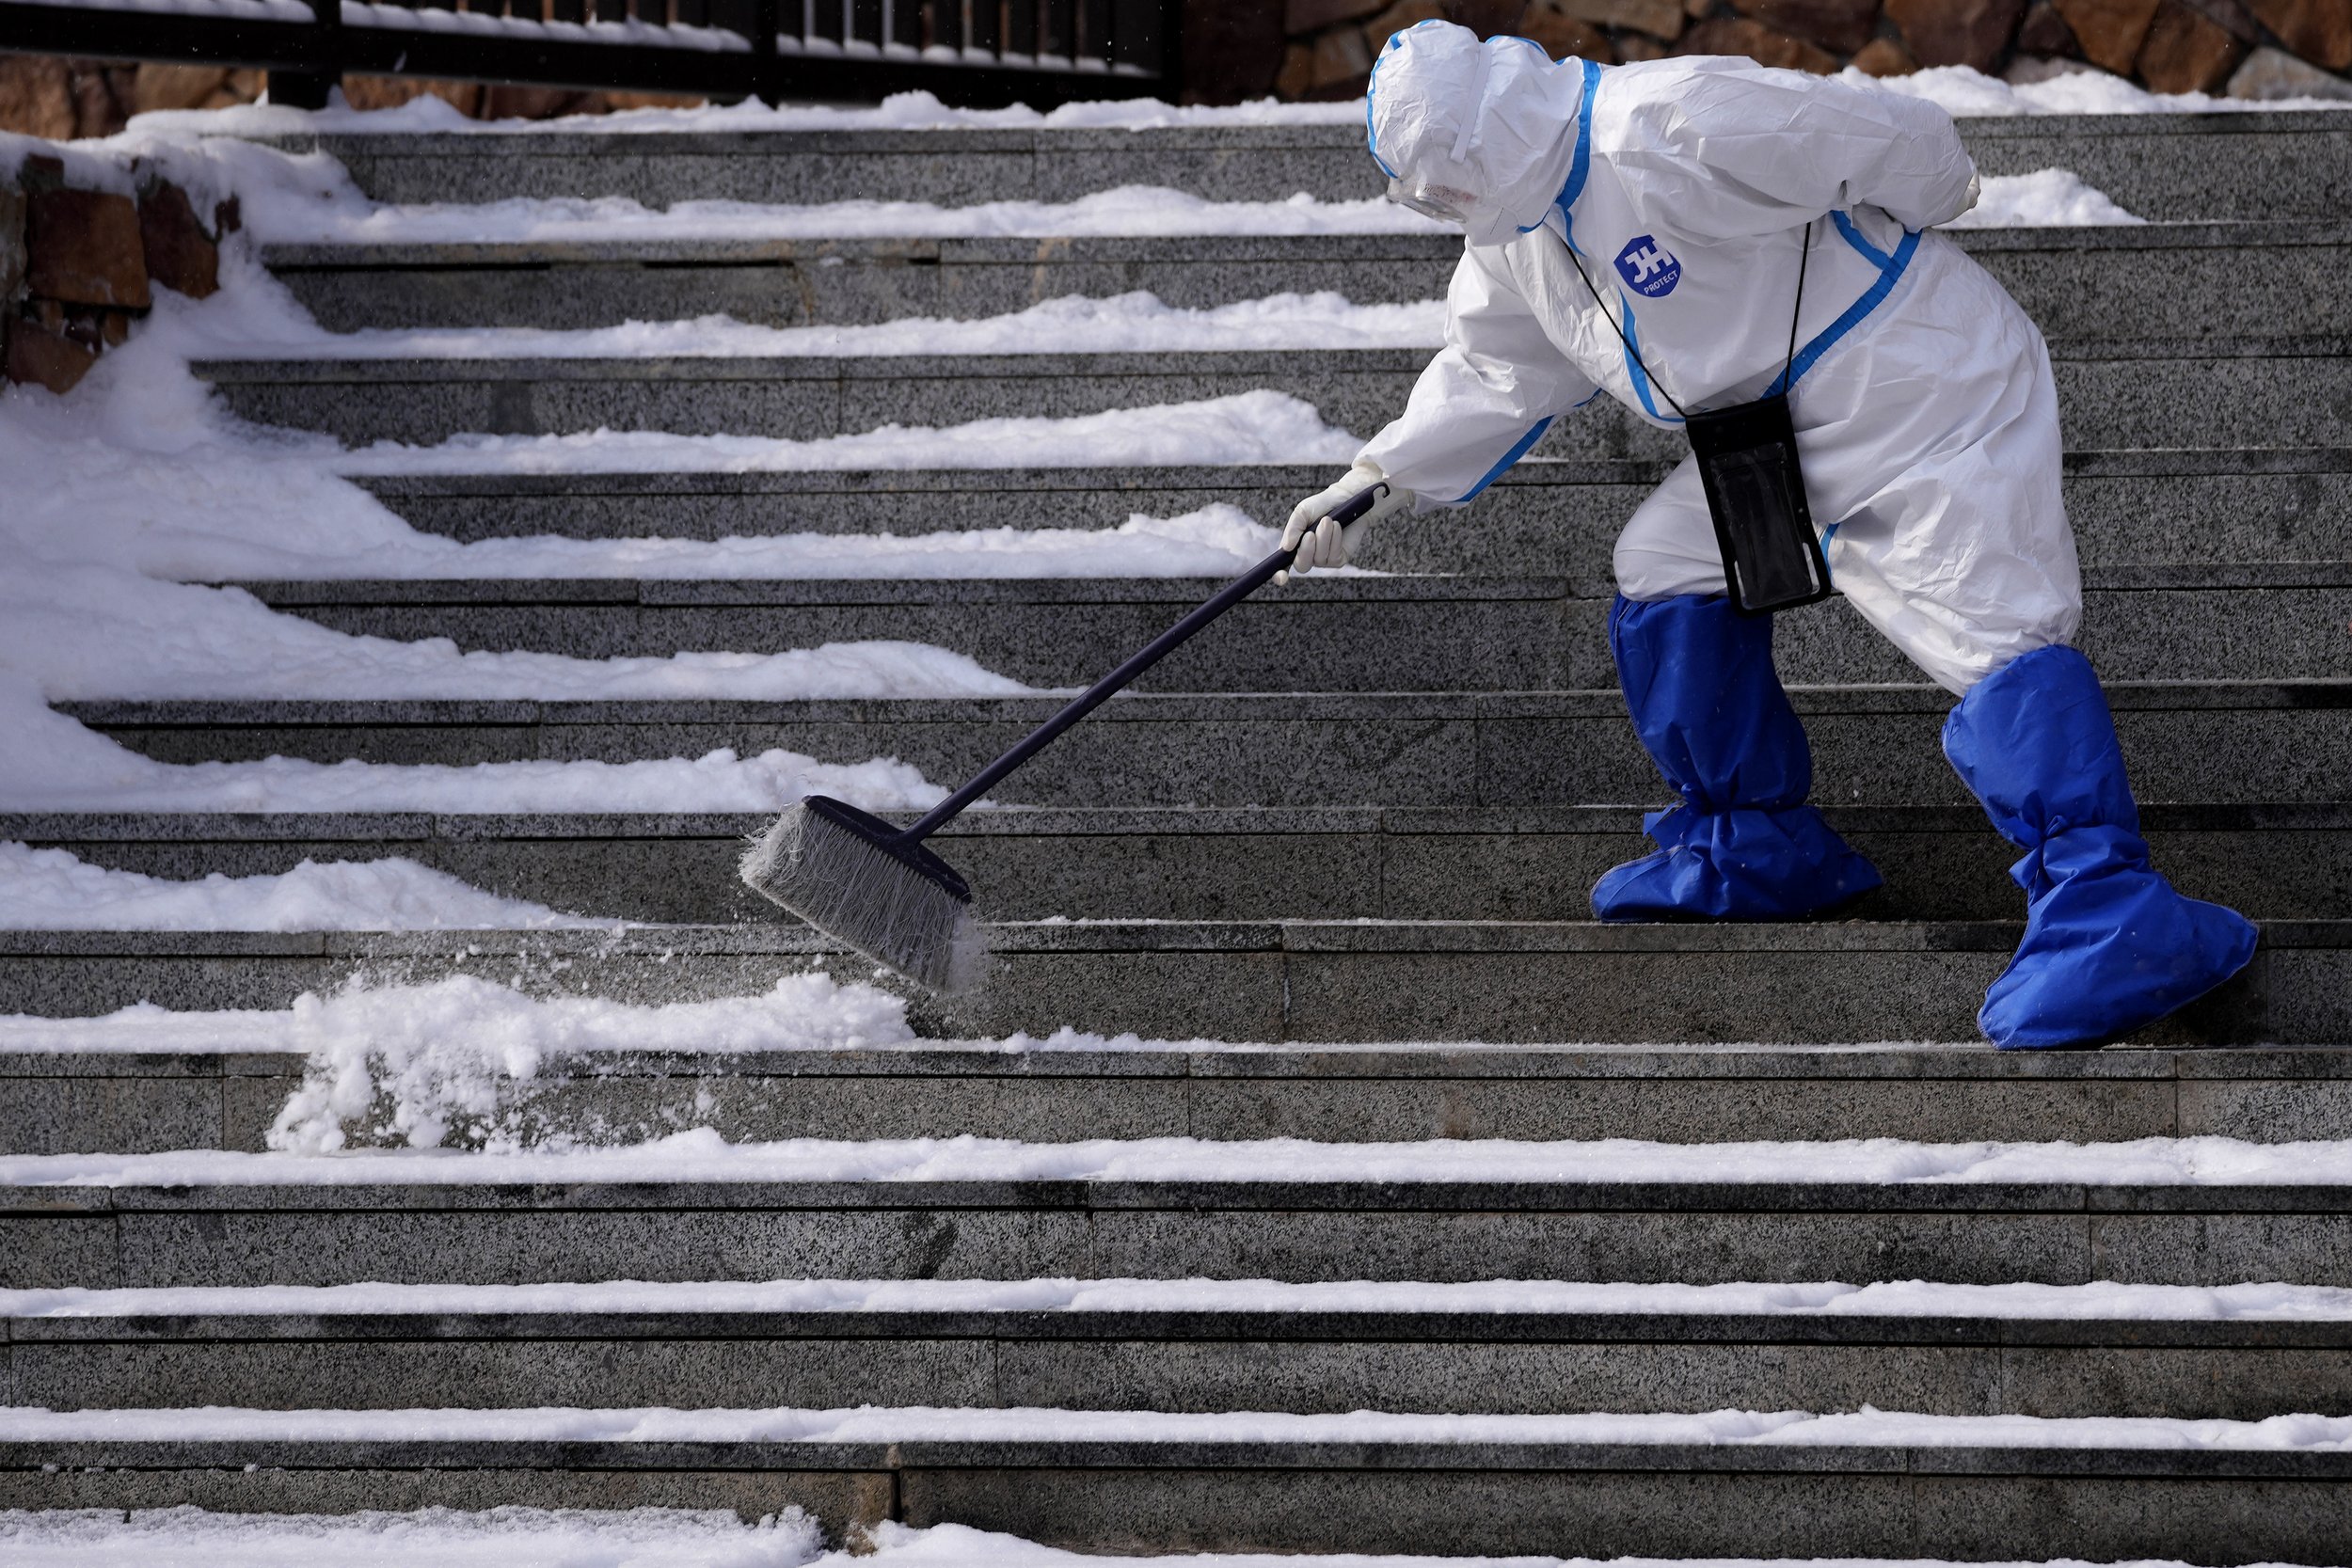  An Olympic worker in protective clothing clears snow from the steps at a hotel inside the Olympic bubble during the 2022 Winter Olympics, Saturday, Feb. 12, 2022, in Zhangjiakou, China. (AP Photo/Frank Augstein) 